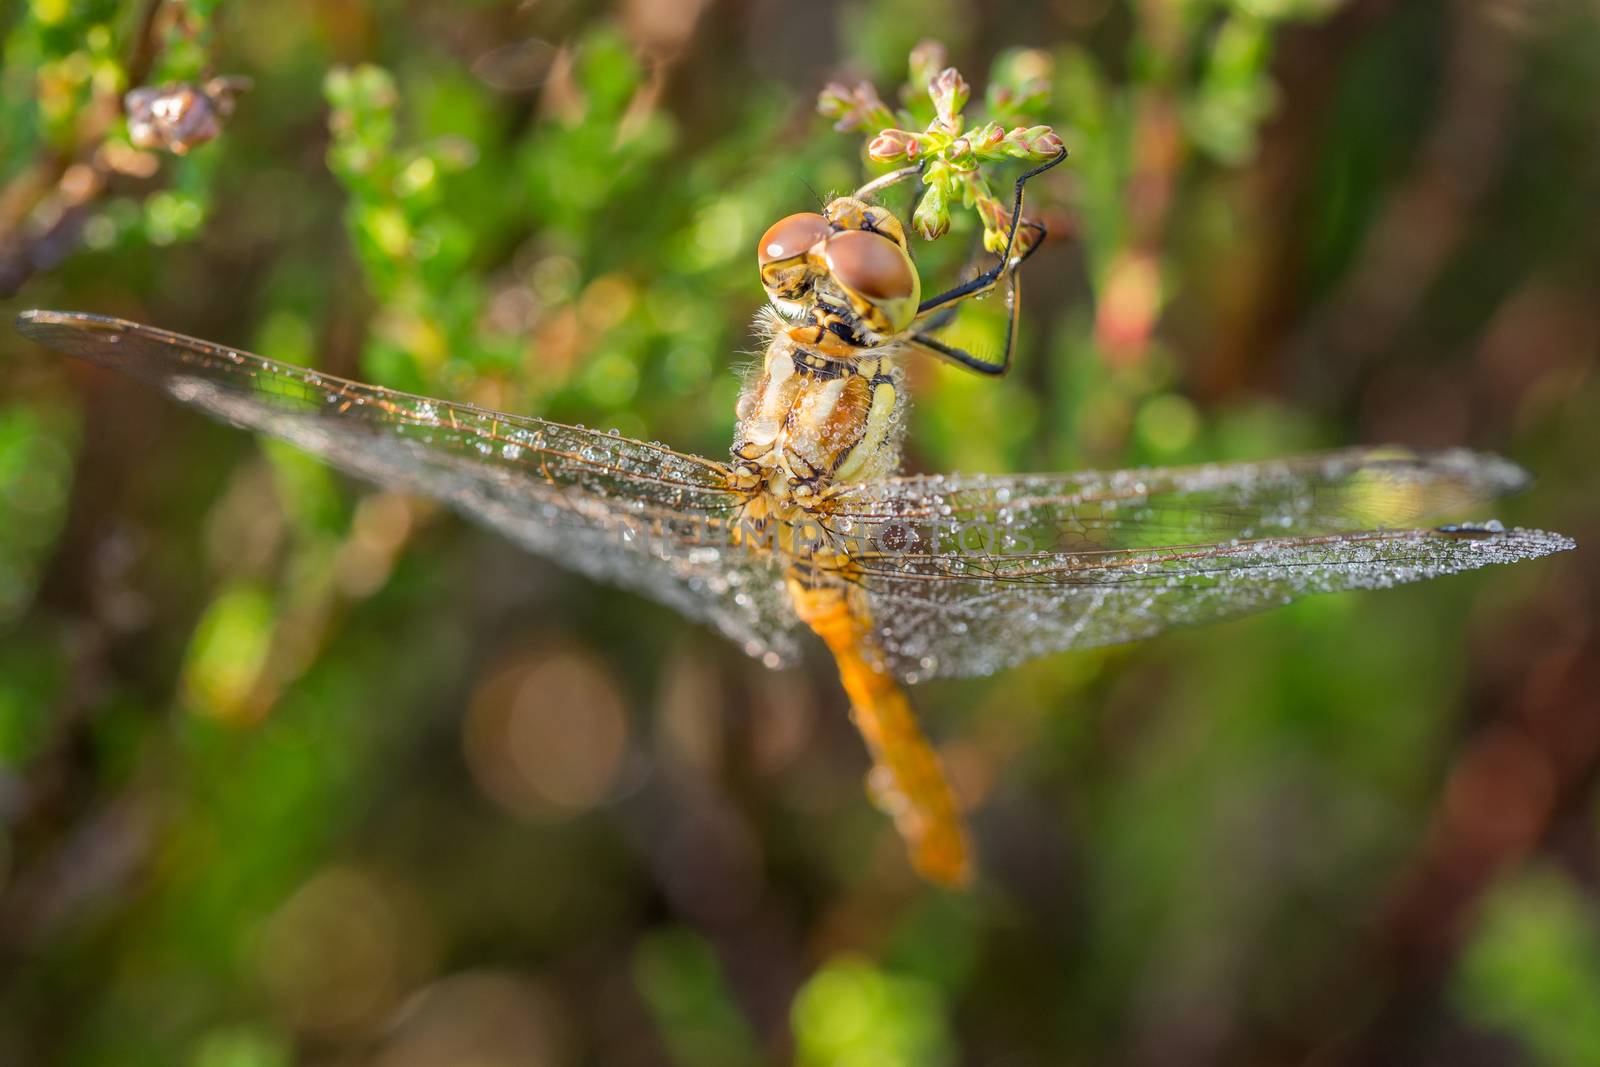 Looking down on a dragonfly covered in morning dew